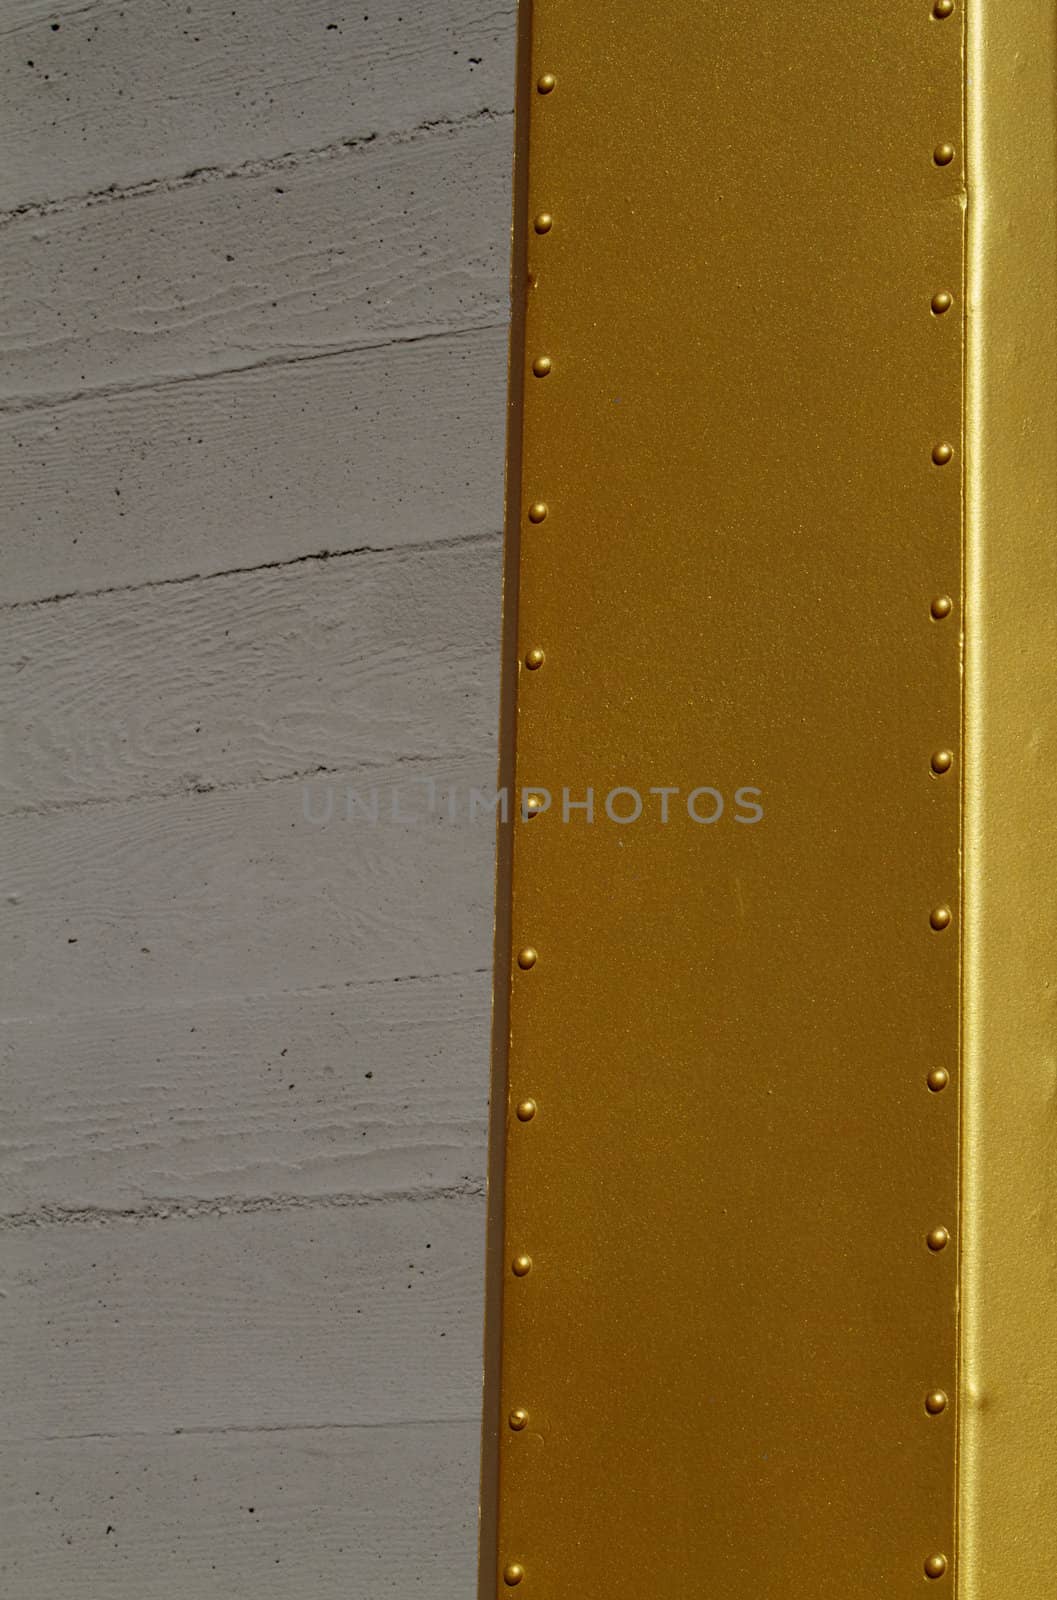 Abstract of small portion of gold beam next to concrete wall